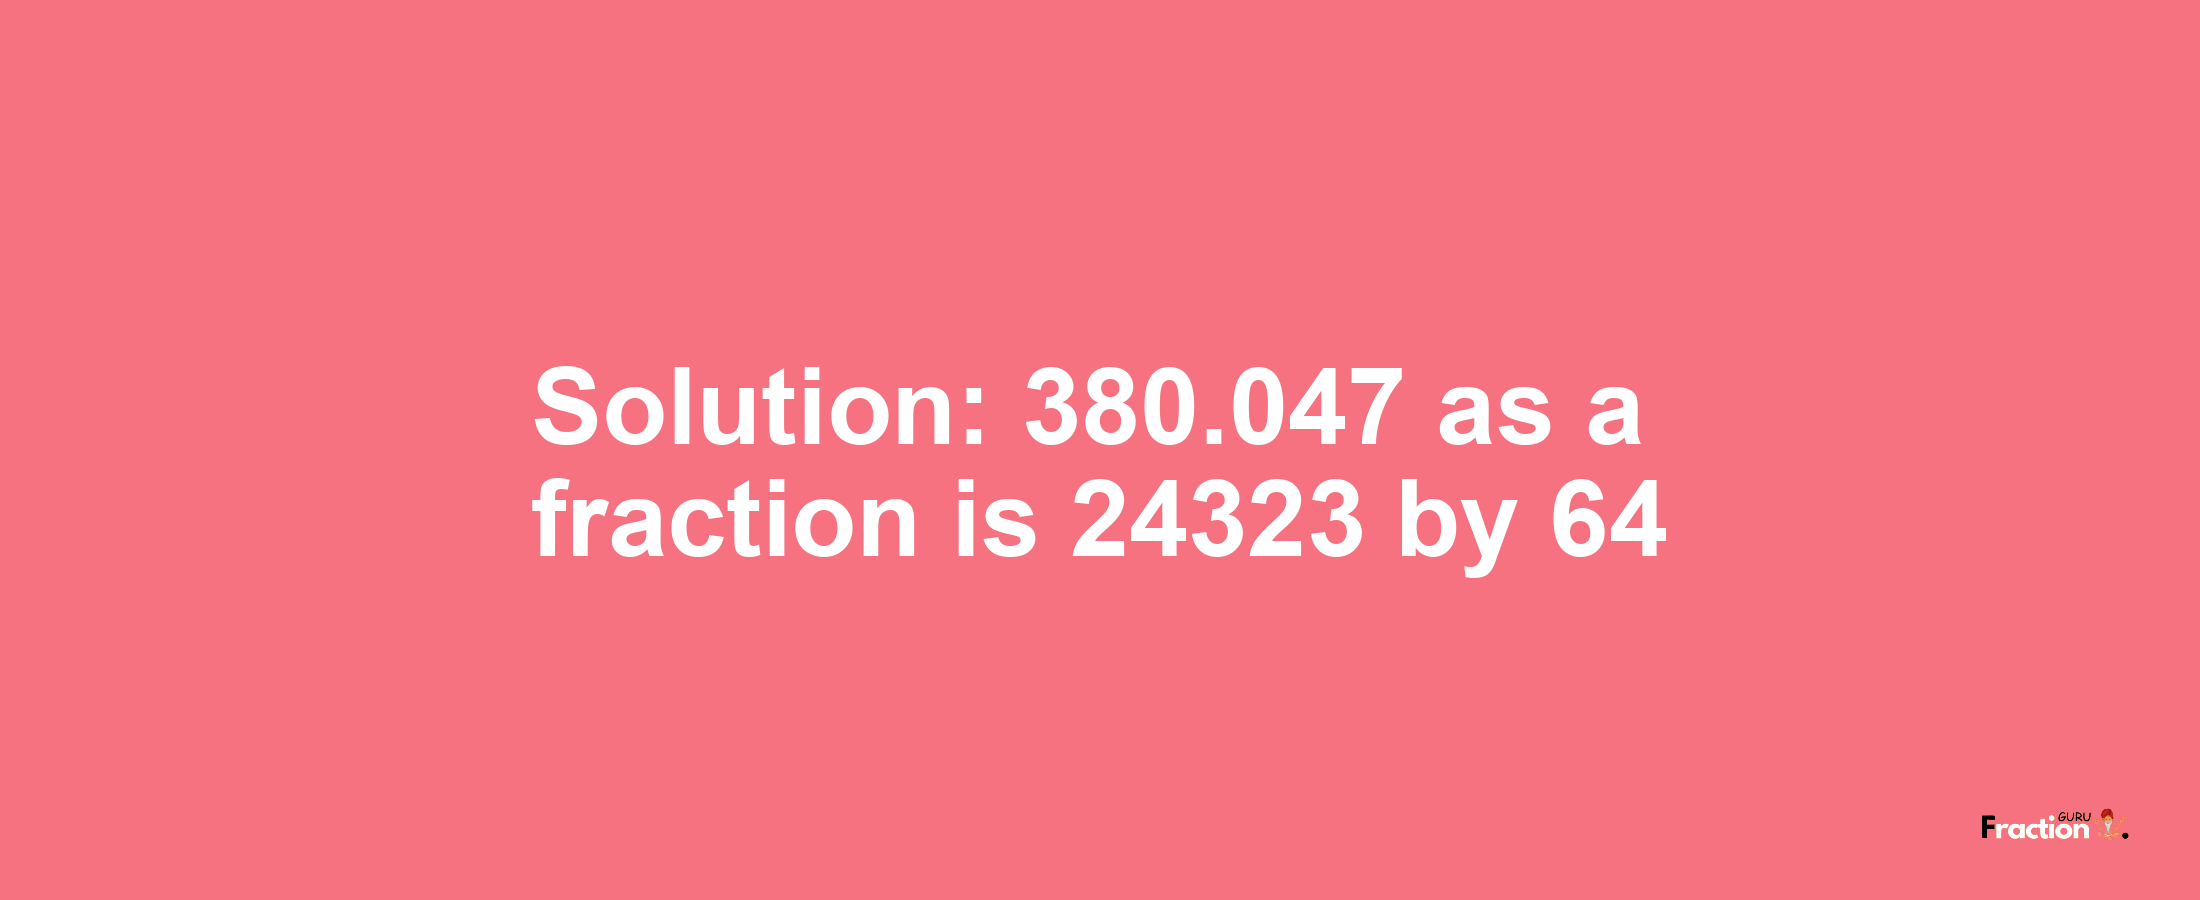 Solution:380.047 as a fraction is 24323/64